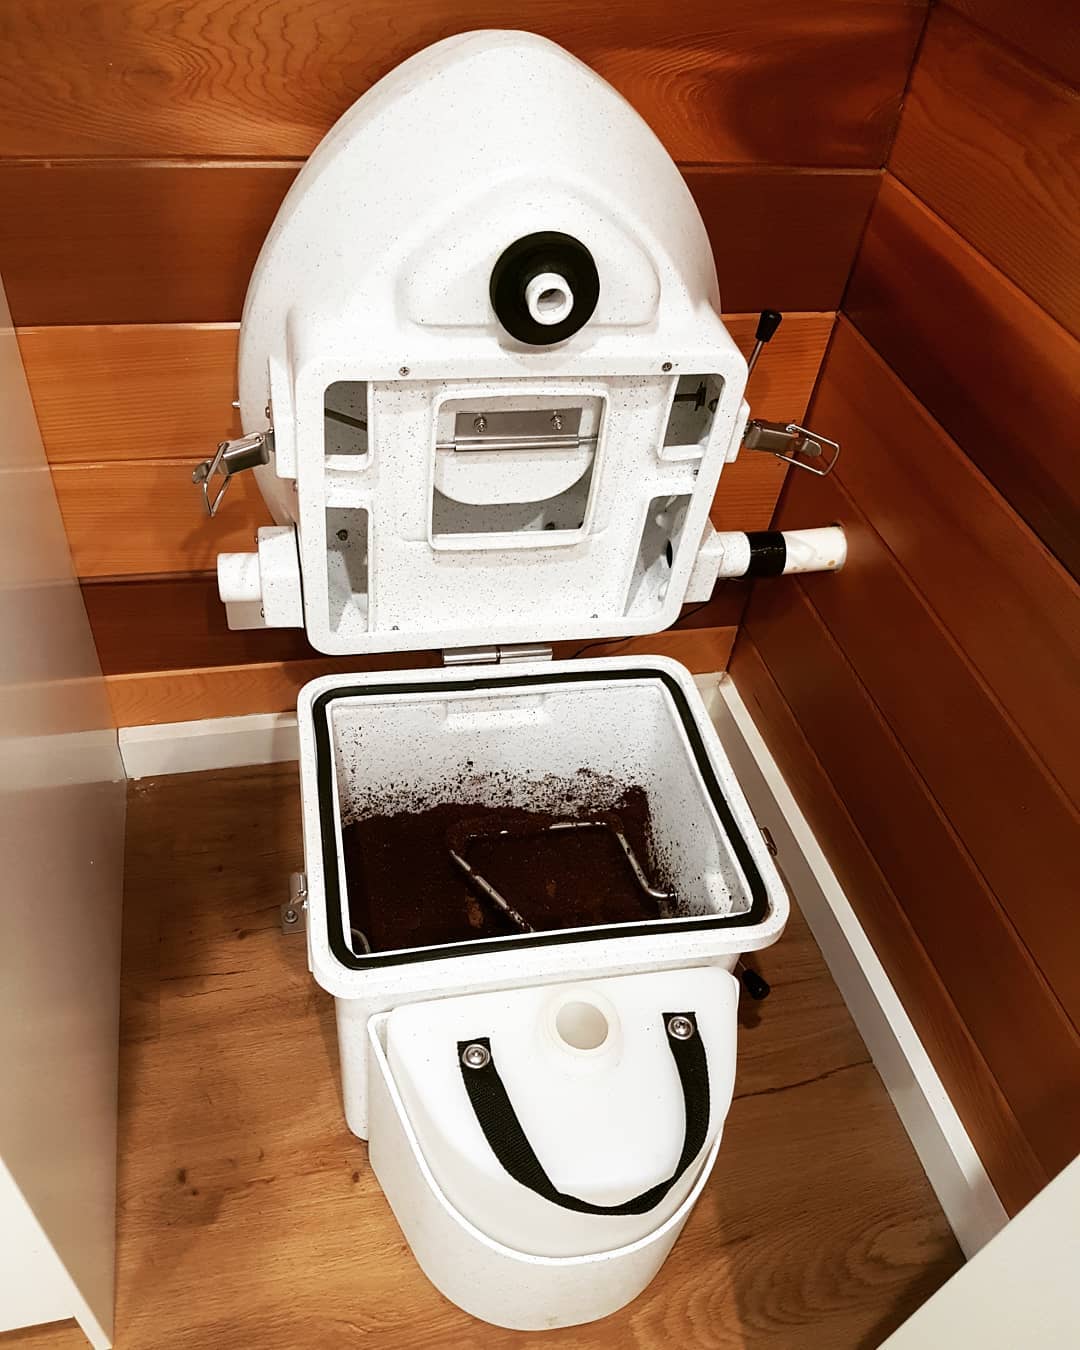 Composting toilet in a campervan conversion